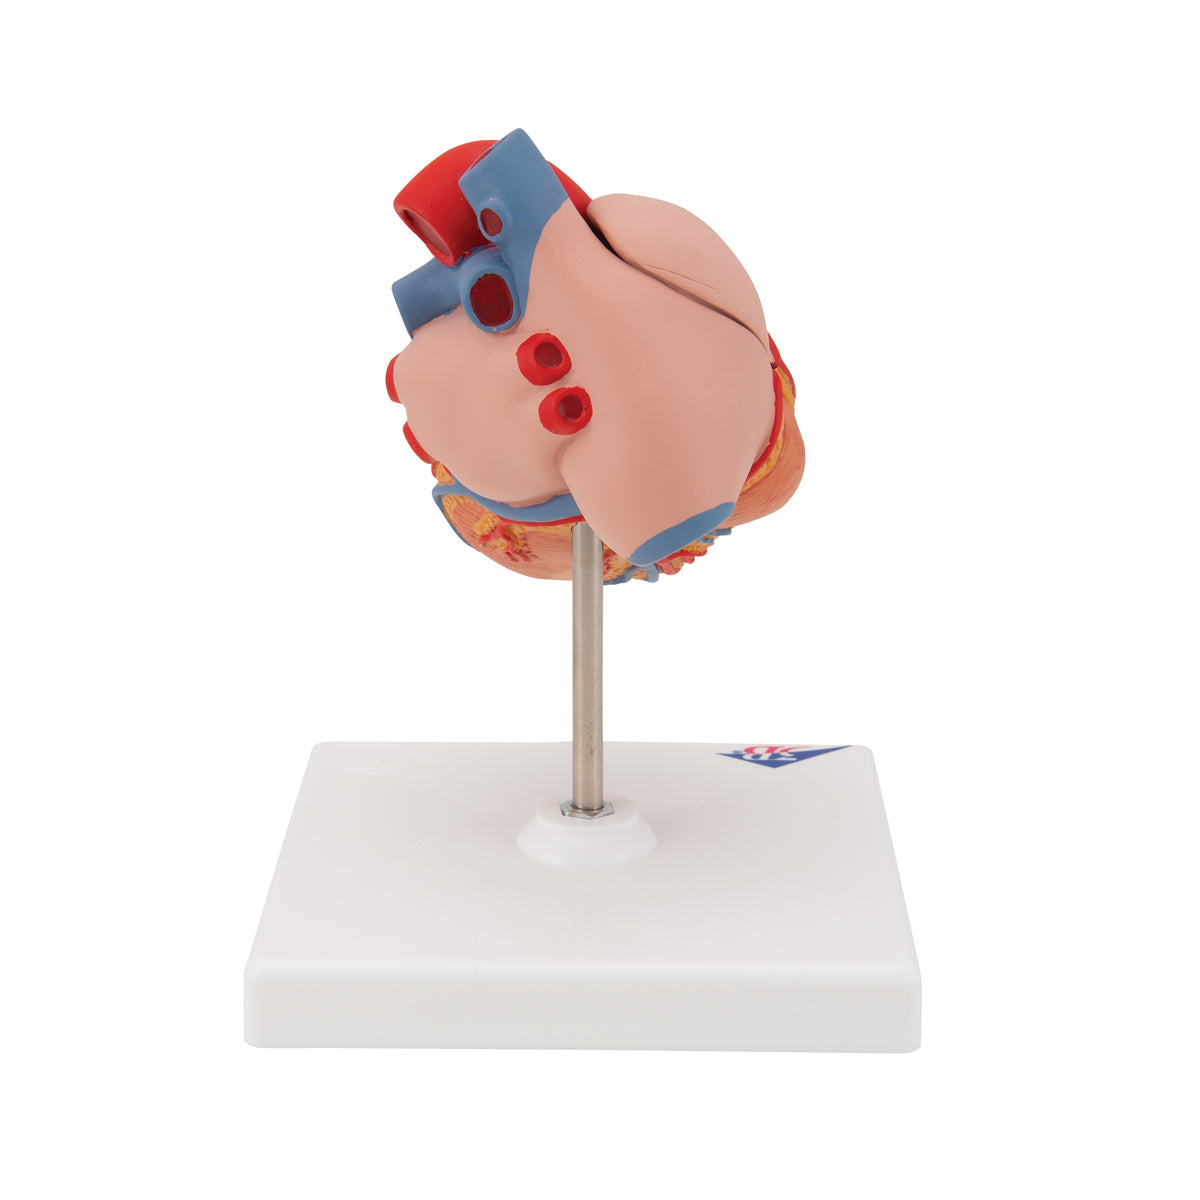 Diminished heart model with left ventricular hypertrophy and strain